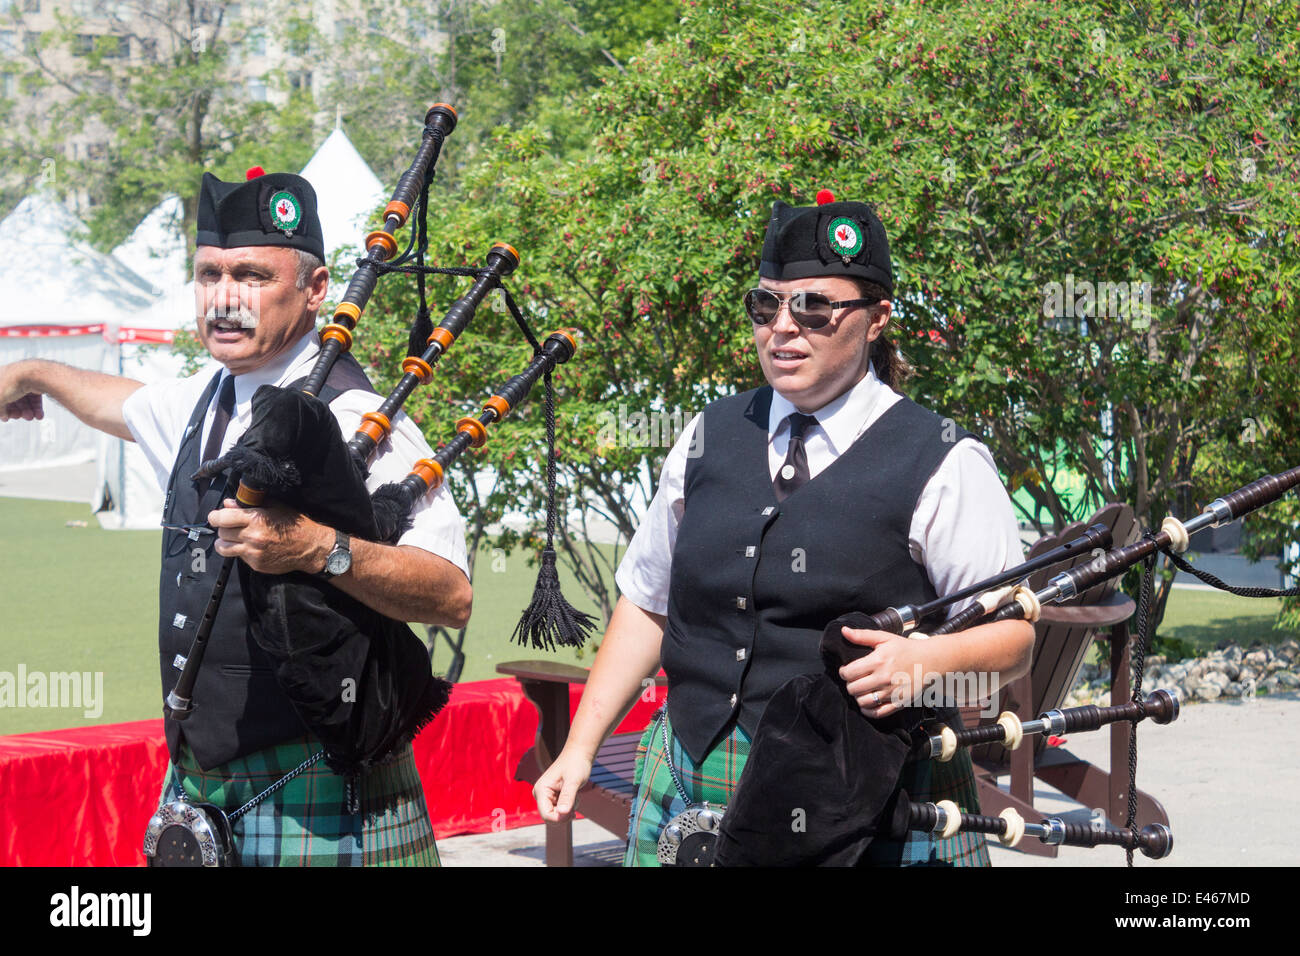 Male and female bagpipe players holding bagpipes for the Dundas Pipes and Drum at Harbourfront for Canada Day Stock Photo